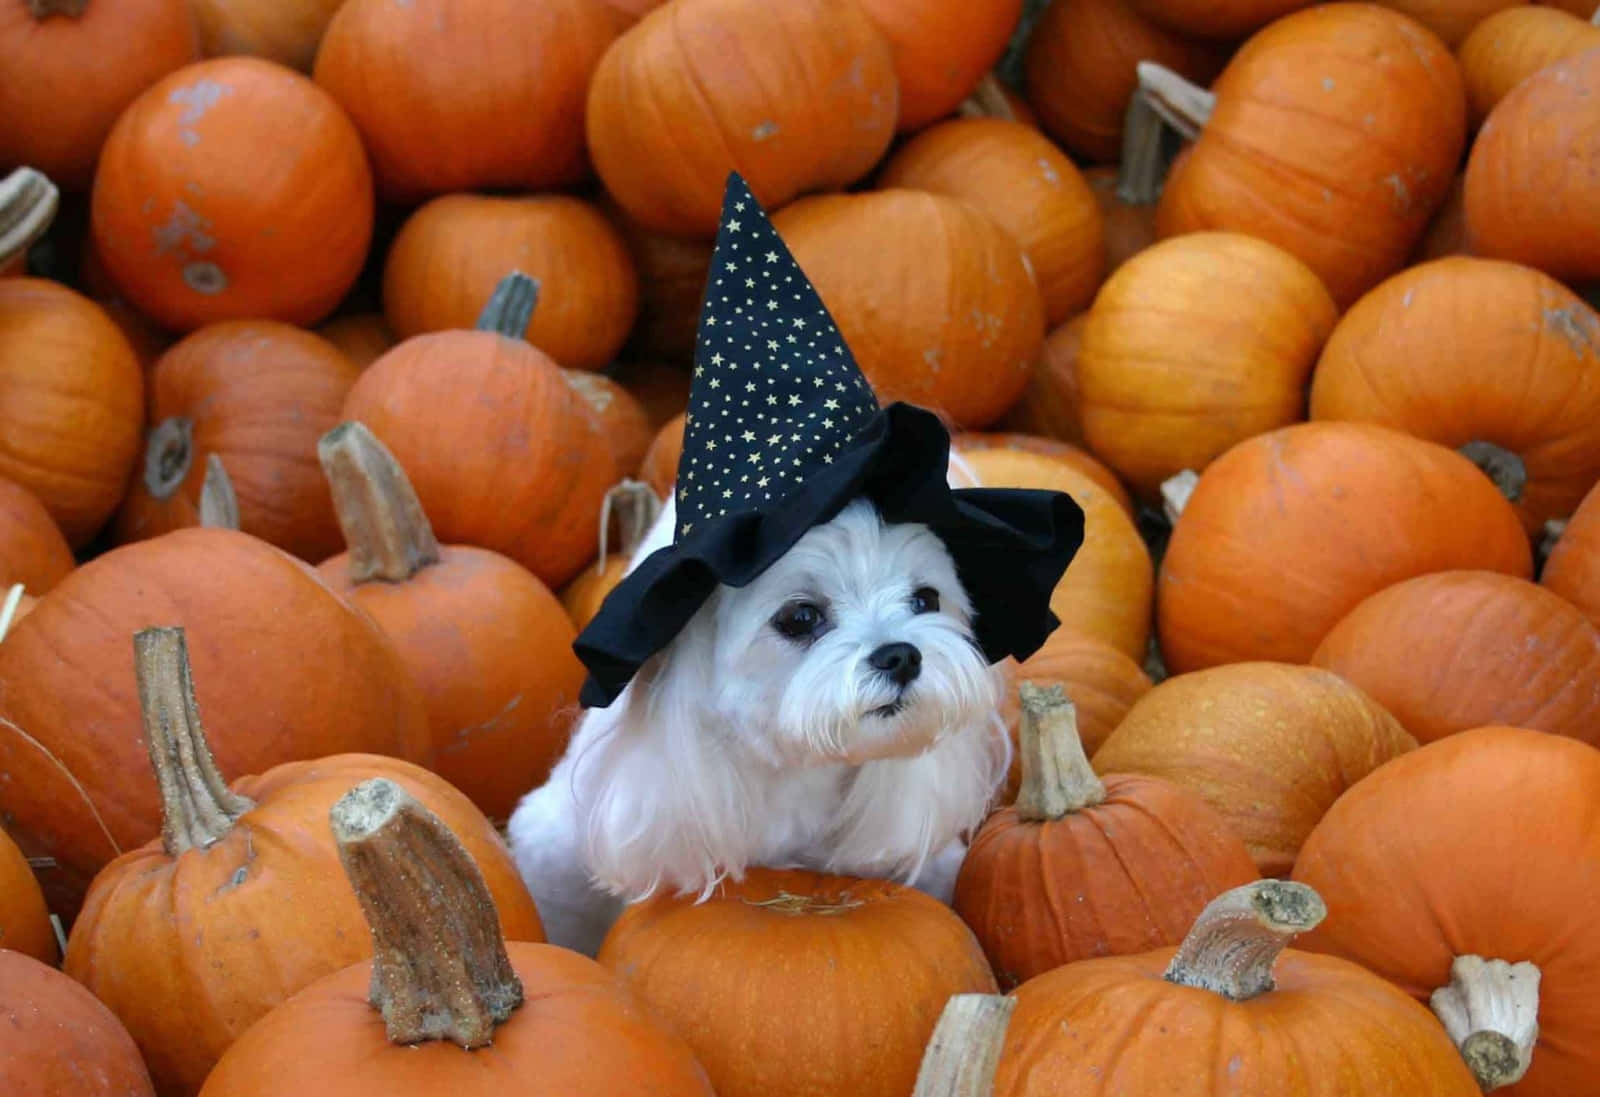 Get your pet in the spooky spirit this season in an unforgettable Halloween costume! Wallpaper